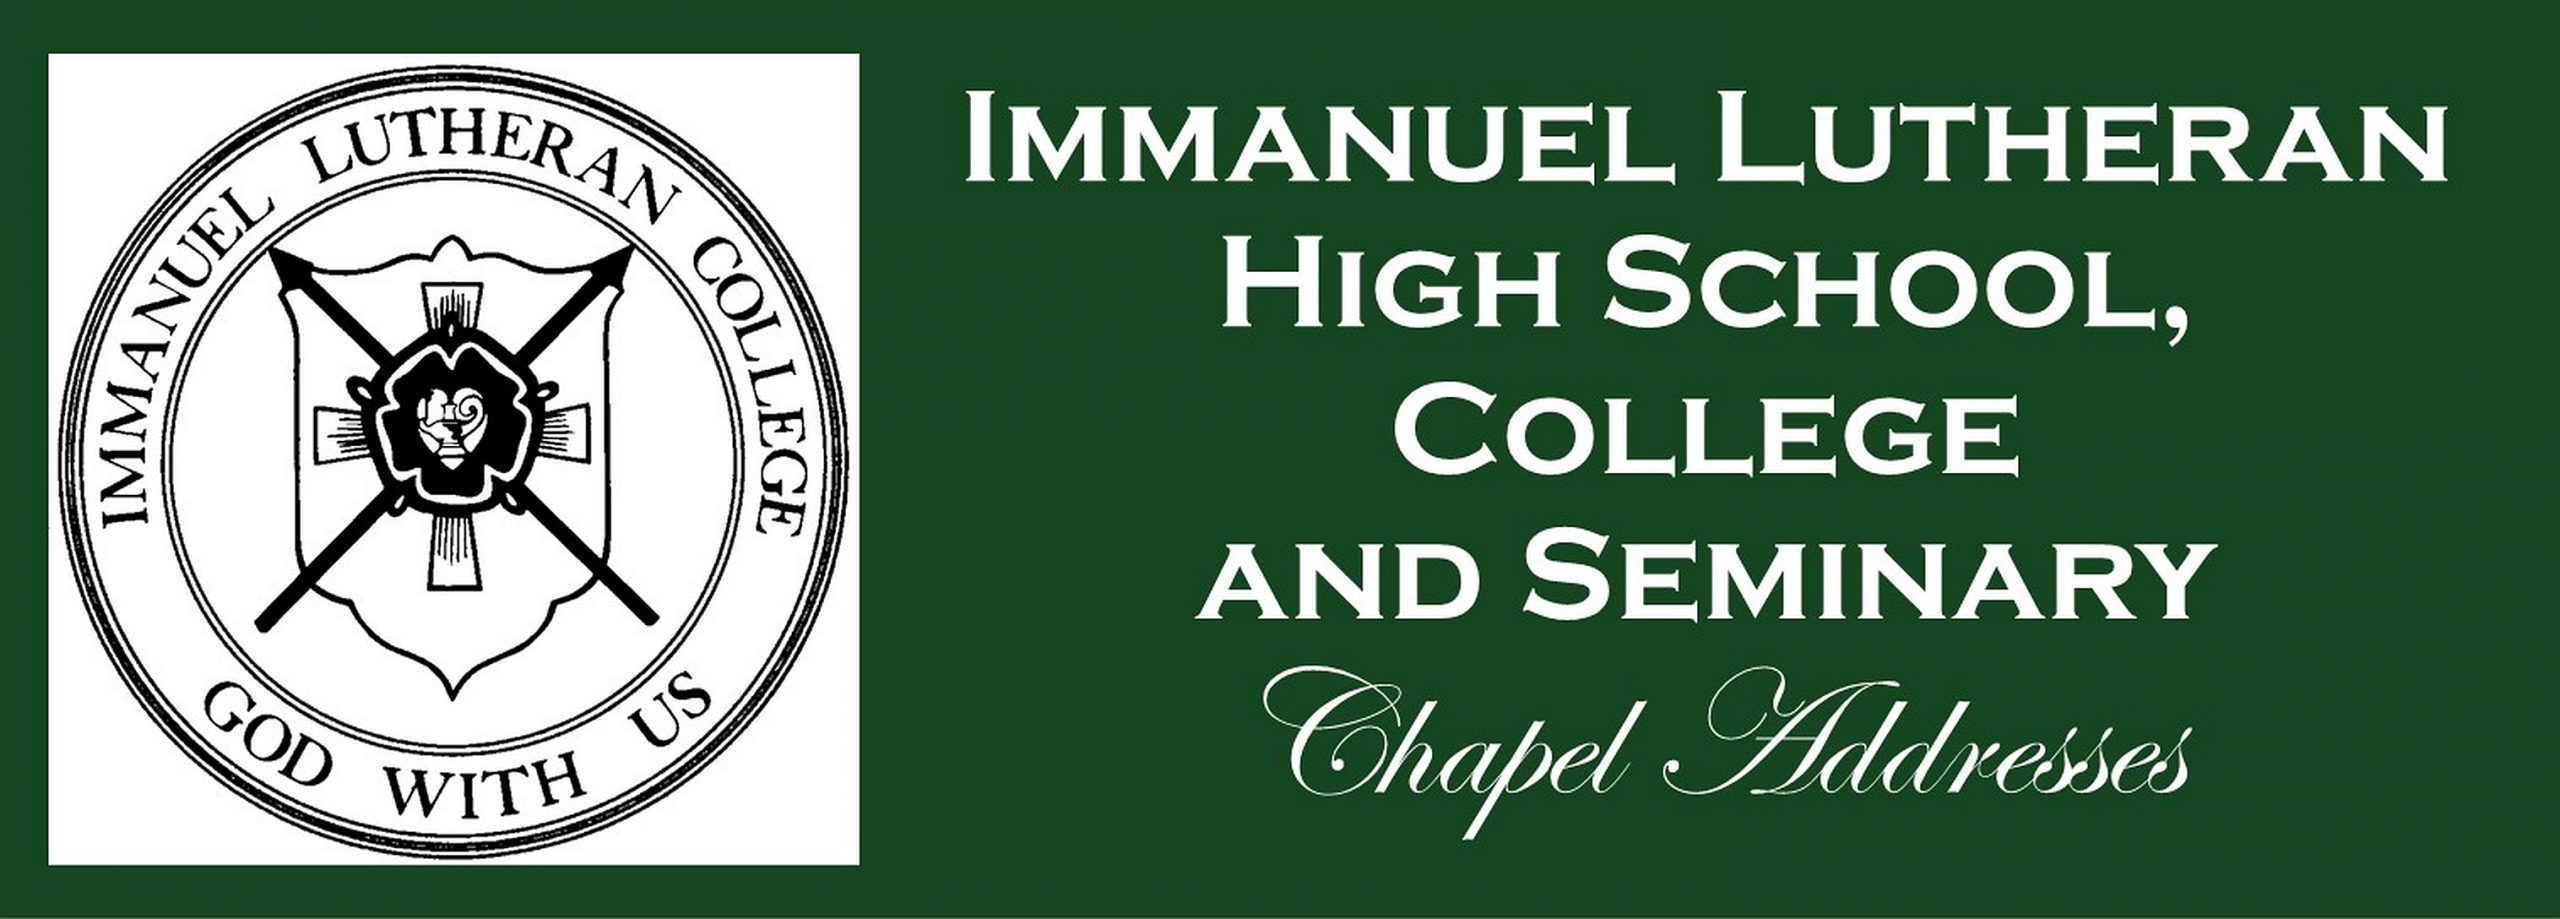 Immanuel Lutheran High School, College and Seminary chapel addresses